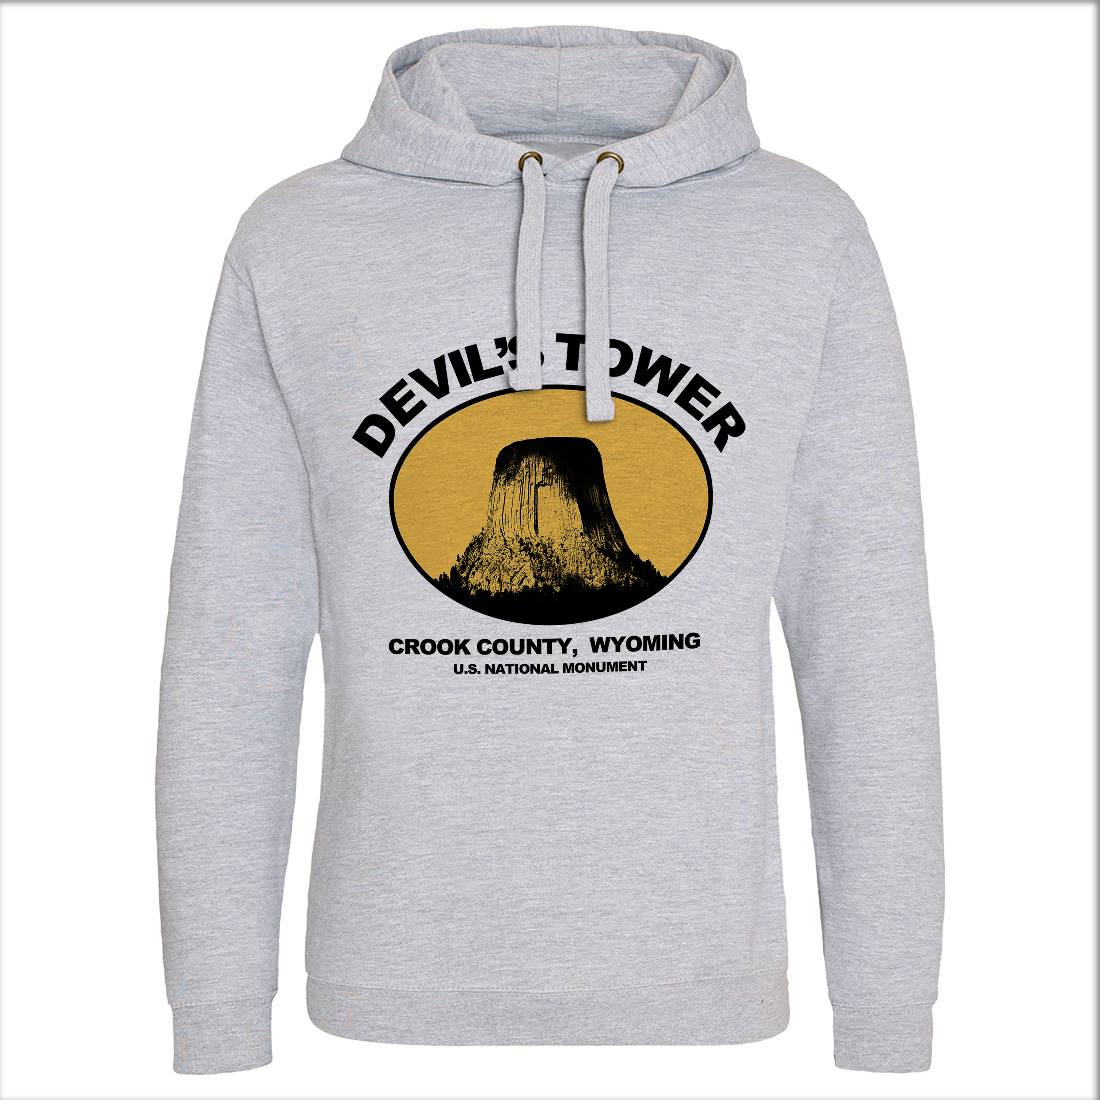 Devils Tower Mens Hoodie Without Pocket Space D431